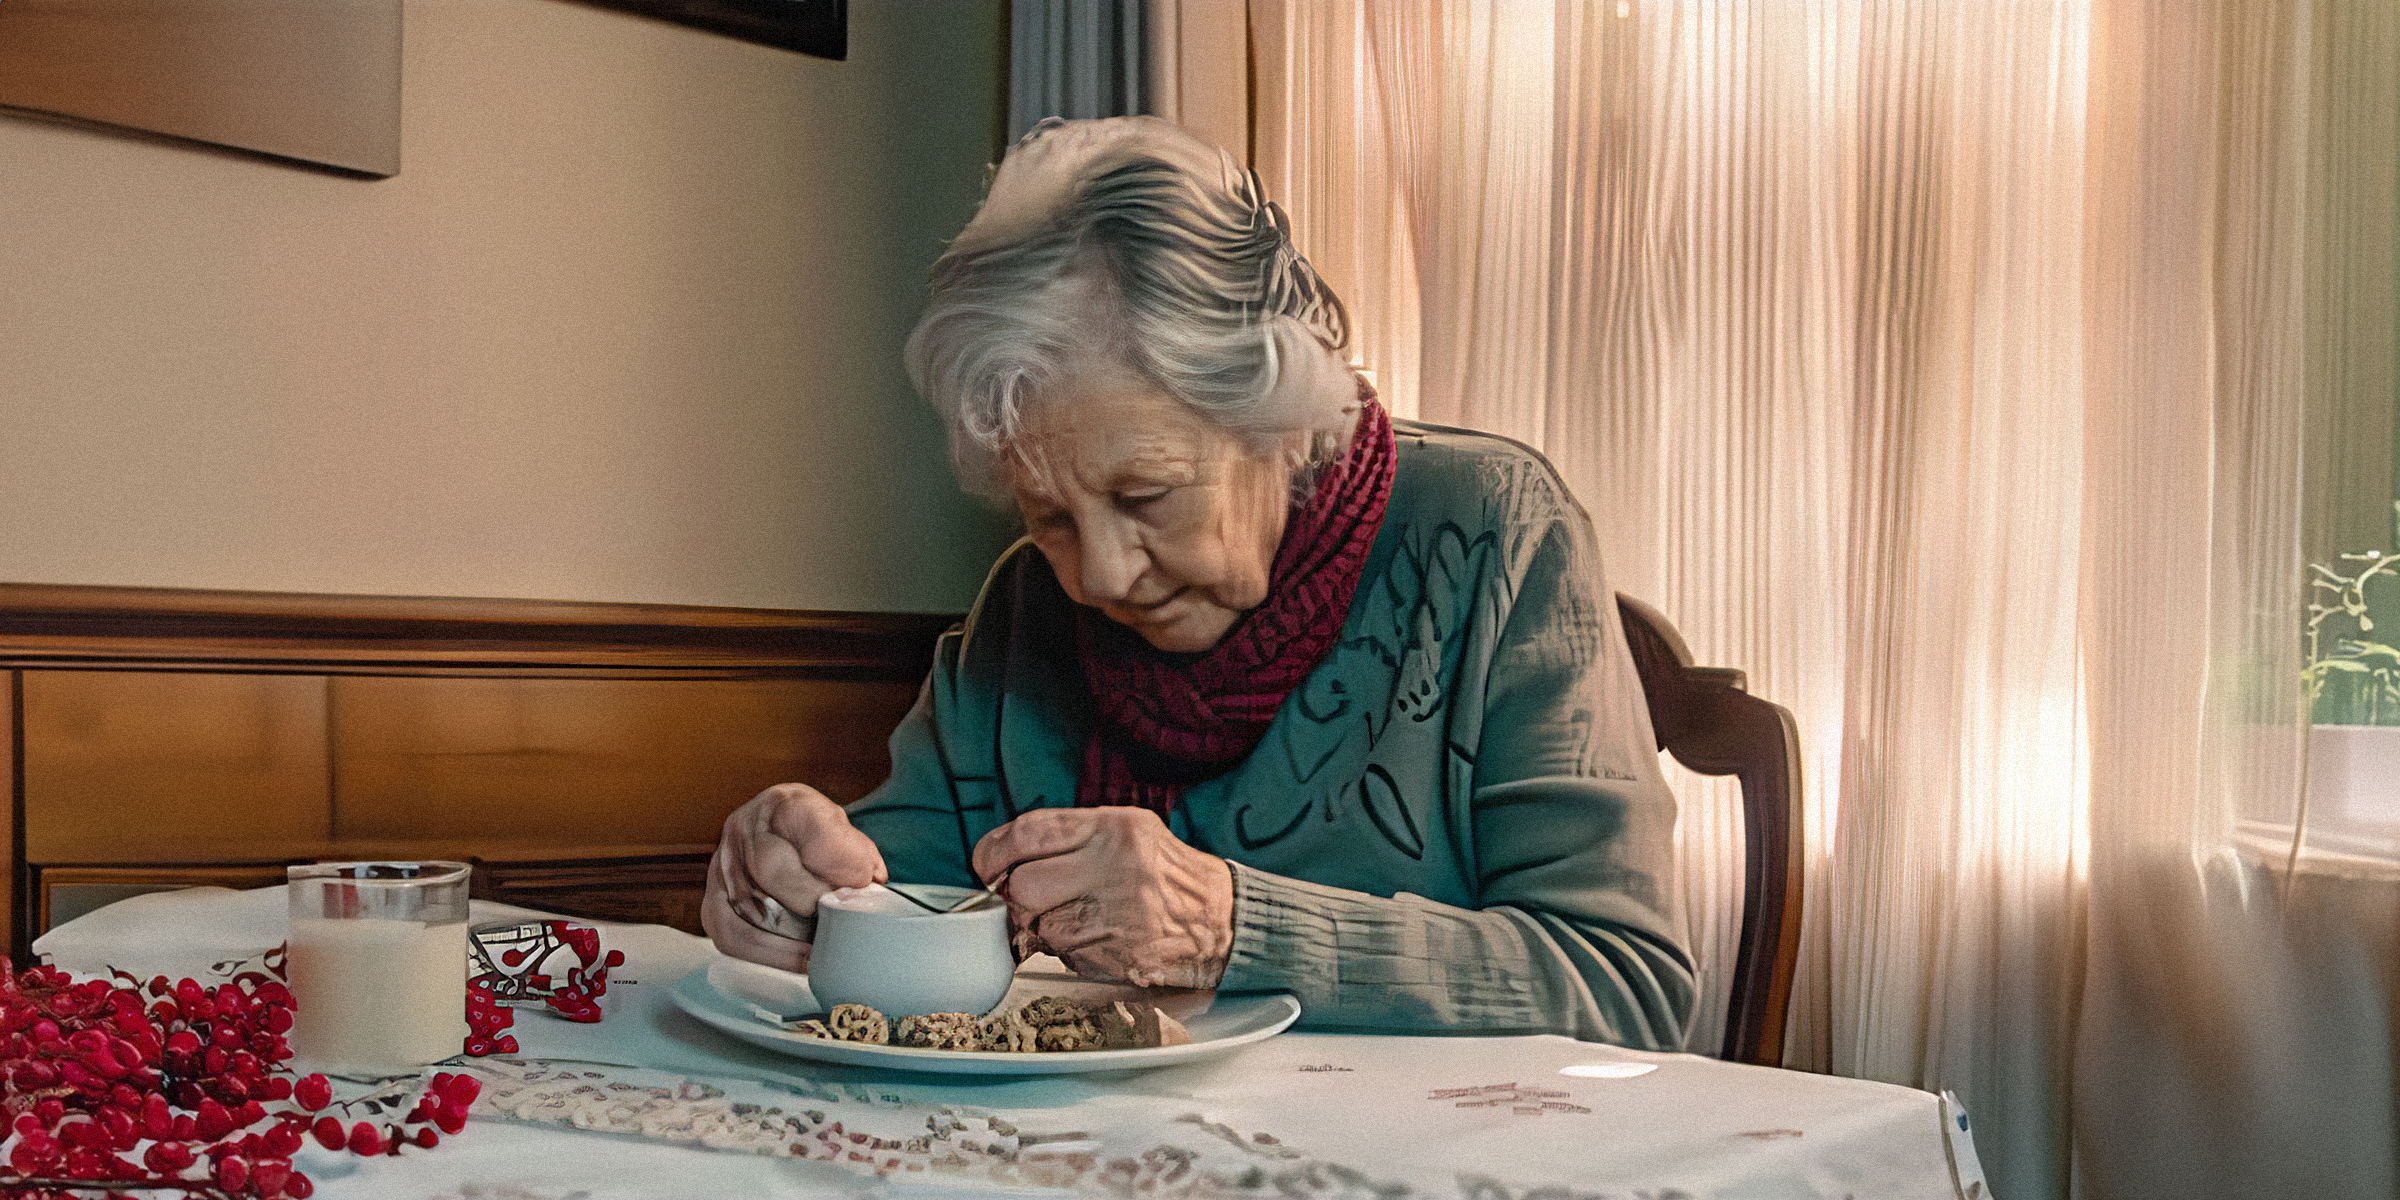 An elderly woman having a beverage and cakes | Source: Amomama